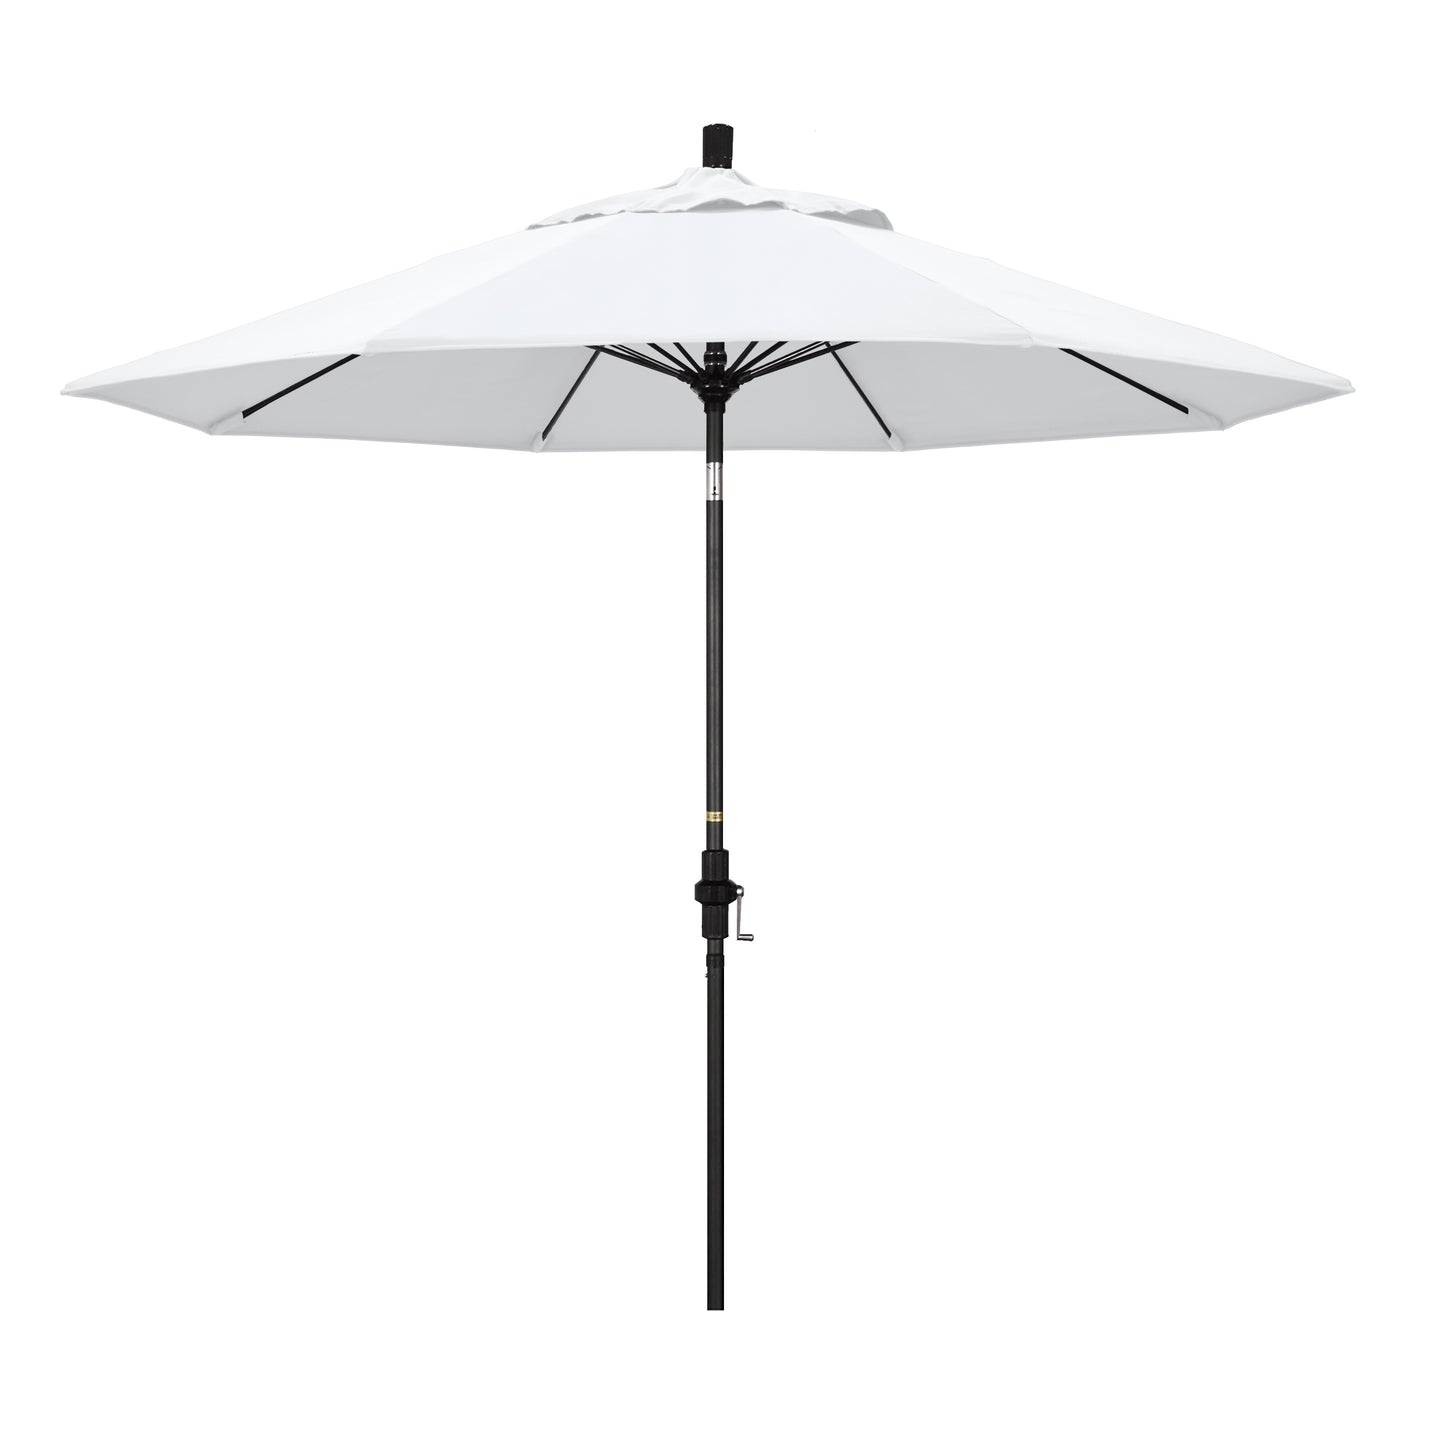 CasaFoyer 9' Fiberglass Frame Patio Umbrella with Water-Repellent Fabric, Crank Lift, and Infinity Tilt - Ideal for Sun Protection and Durability